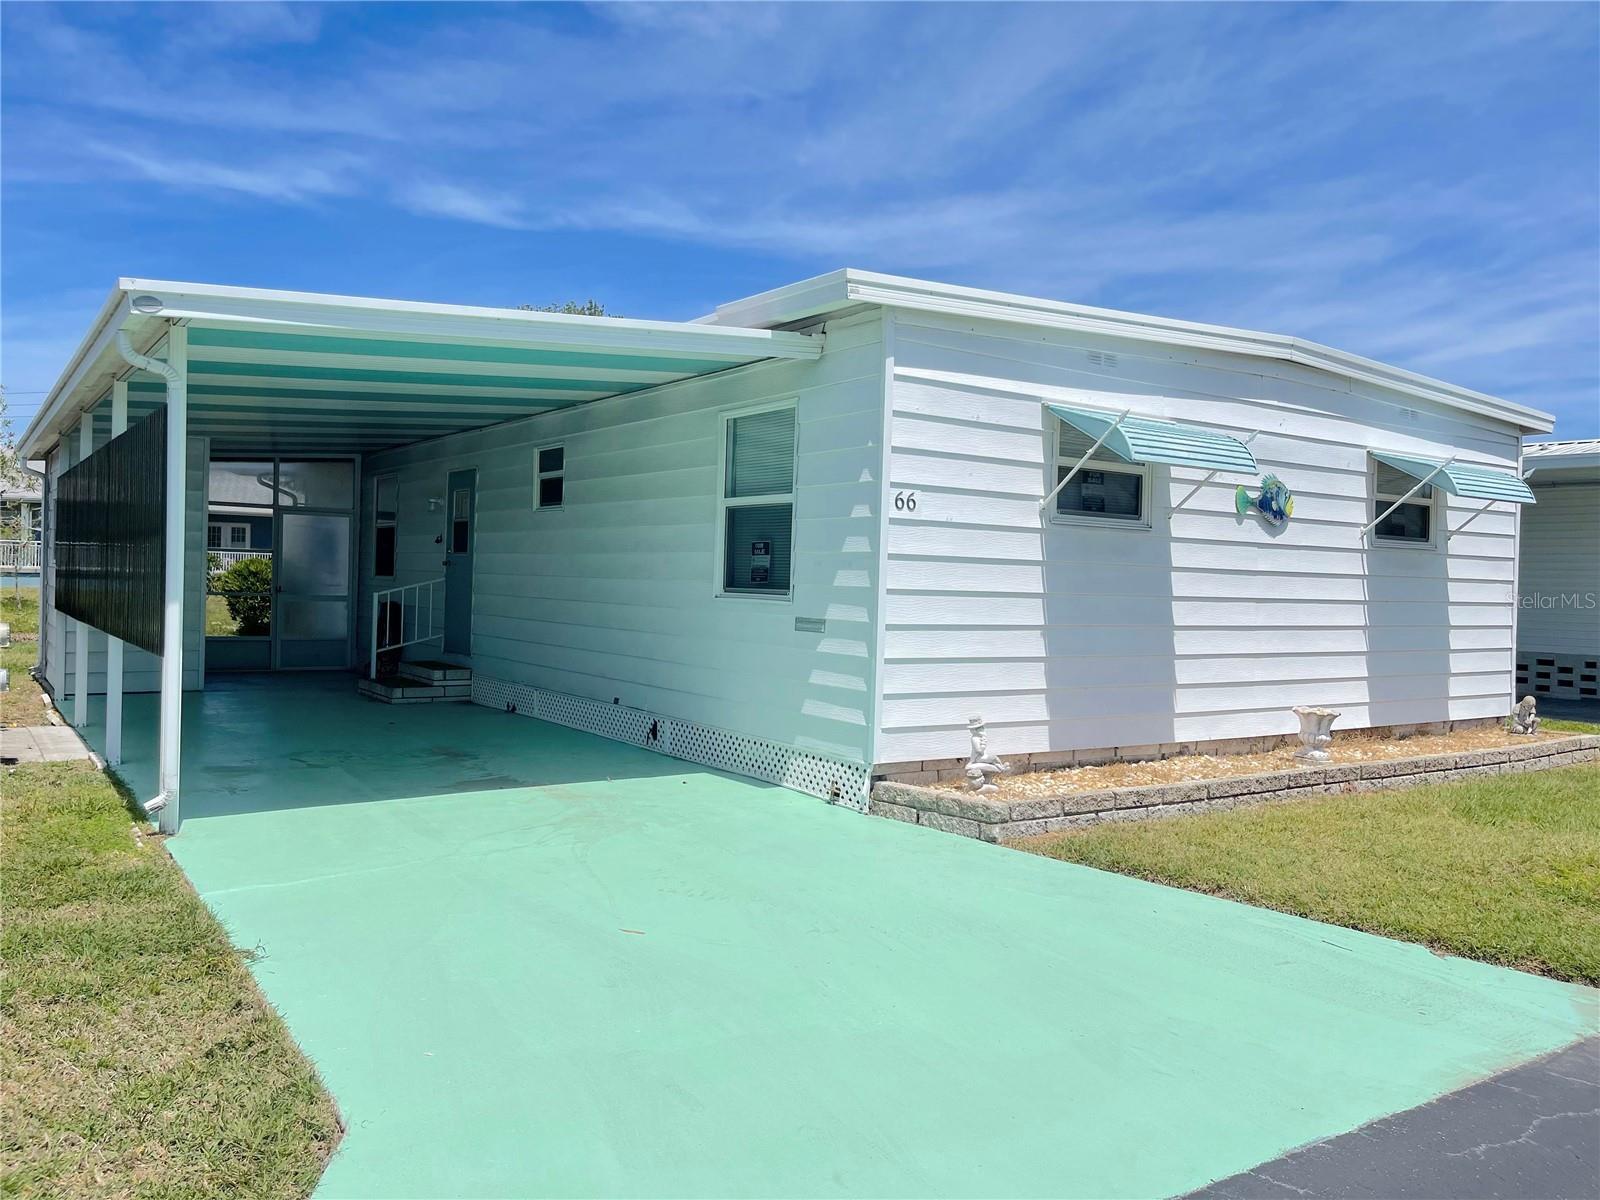 11200 WALSINGHAM 66, LARGO, Mobile Home - Pre 1976,  for sale, The Mount Dora Group 